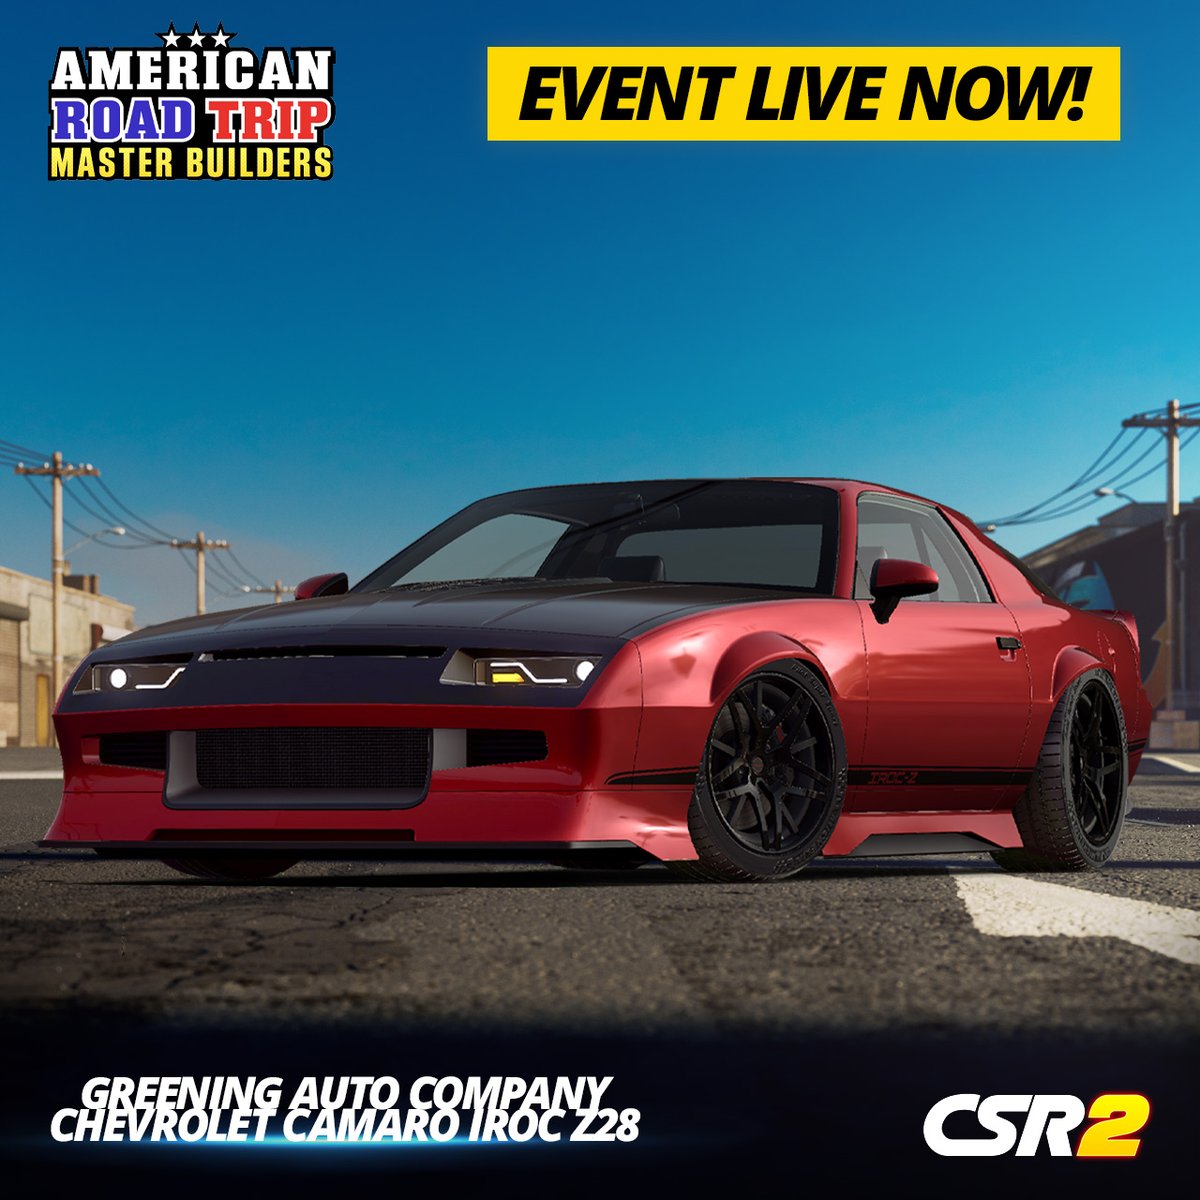 Roar into the week like a true legend with the Greening Auto Company Chevrolet Camaro IROC Z28! 🏁🚗💨

Get started with the American Road Trip 3: Boston, here:

zynga.social/csr2tw

#ART3 #AmericanRoadTrip #GreeningAutoCompany #camaroirocz28 #Chevrolet #CSR2 #CSRRacing #CSR